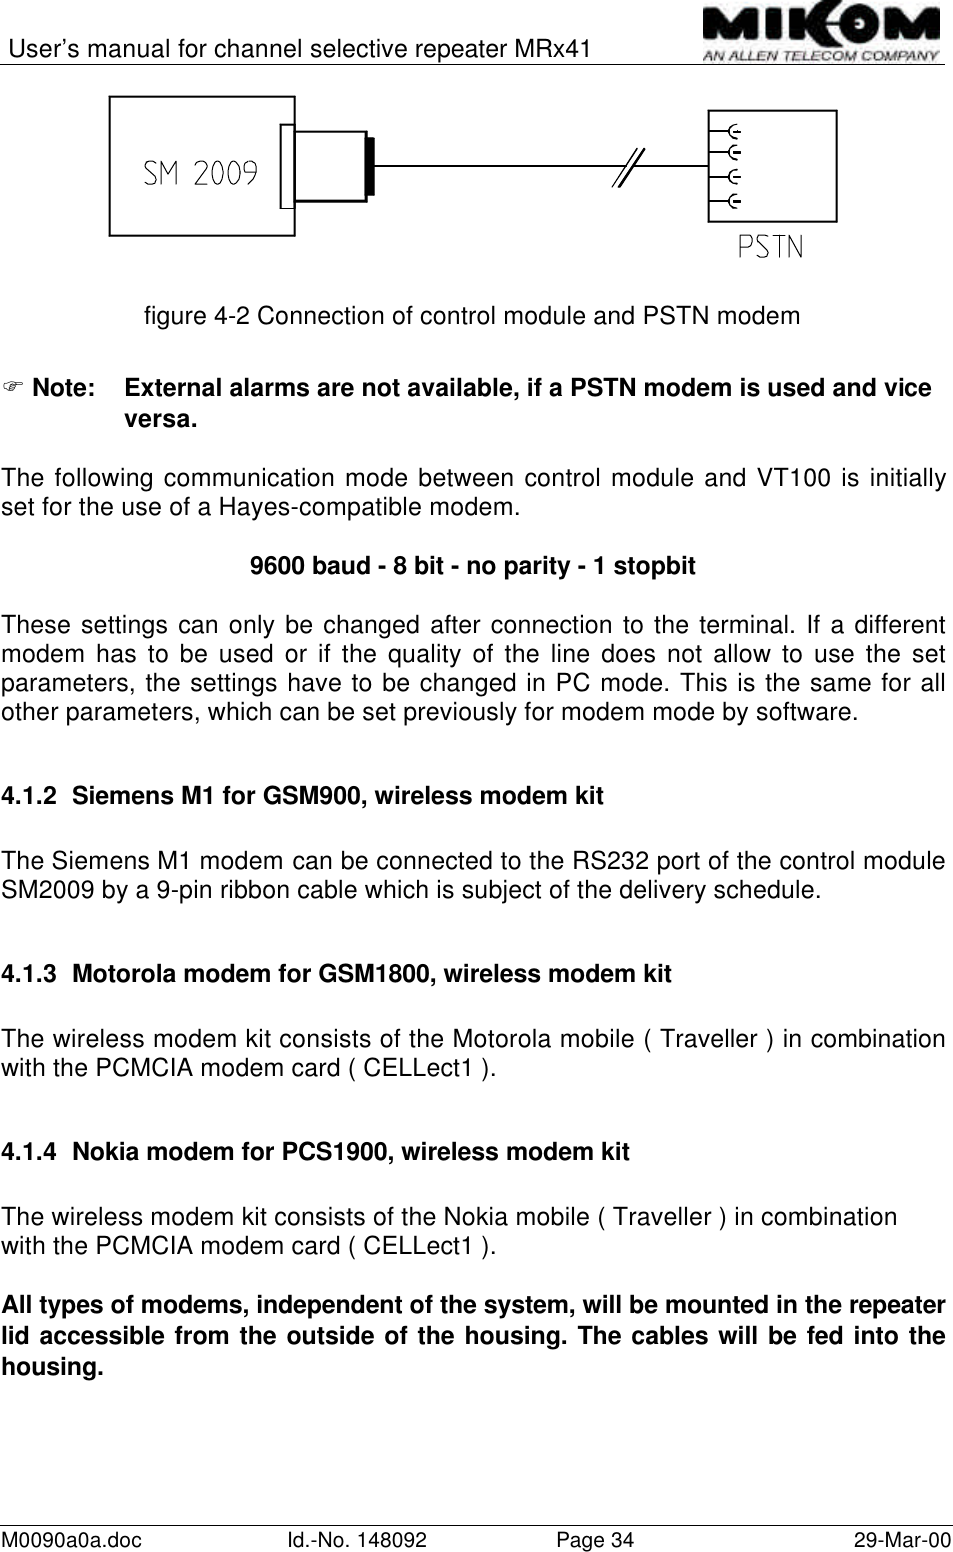 User’s manual for channel selective repeater MRx41M0090a0a.doc Id.-No. 148092 Page 34 29-Mar-00figure 4-2 Connection of control module and PSTN modemF Note: External alarms are not available, if a PSTN modem is used and viceversa.The following communication mode between control module and VT100 is initiallyset for the use of a Hayes-compatible modem.9600 baud - 8 bit - no parity - 1 stopbitThese settings can only be changed after connection to the terminal. If a differentmodem has to be used or if the quality of the line does not allow to use the setparameters, the settings have to be changed in PC mode. This is the same for allother parameters, which can be set previously for modem mode by software.4.1.2 Siemens M1 for GSM900, wireless modem kitThe Siemens M1 modem can be connected to the RS232 port of the control moduleSM2009 by a 9-pin ribbon cable which is subject of the delivery schedule.4.1.3 Motorola modem for GSM1800, wireless modem kitThe wireless modem kit consists of the Motorola mobile ( Traveller ) in combinationwith the PCMCIA modem card ( CELLect1 ).4.1.4 Nokia modem for PCS1900, wireless modem kitThe wireless modem kit consists of the Nokia mobile ( Traveller ) in combinationwith the PCMCIA modem card ( CELLect1 ).All types of modems, independent of the system, will be mounted in the repeaterlid accessible from the outside of the housing. The cables will be fed into thehousing.